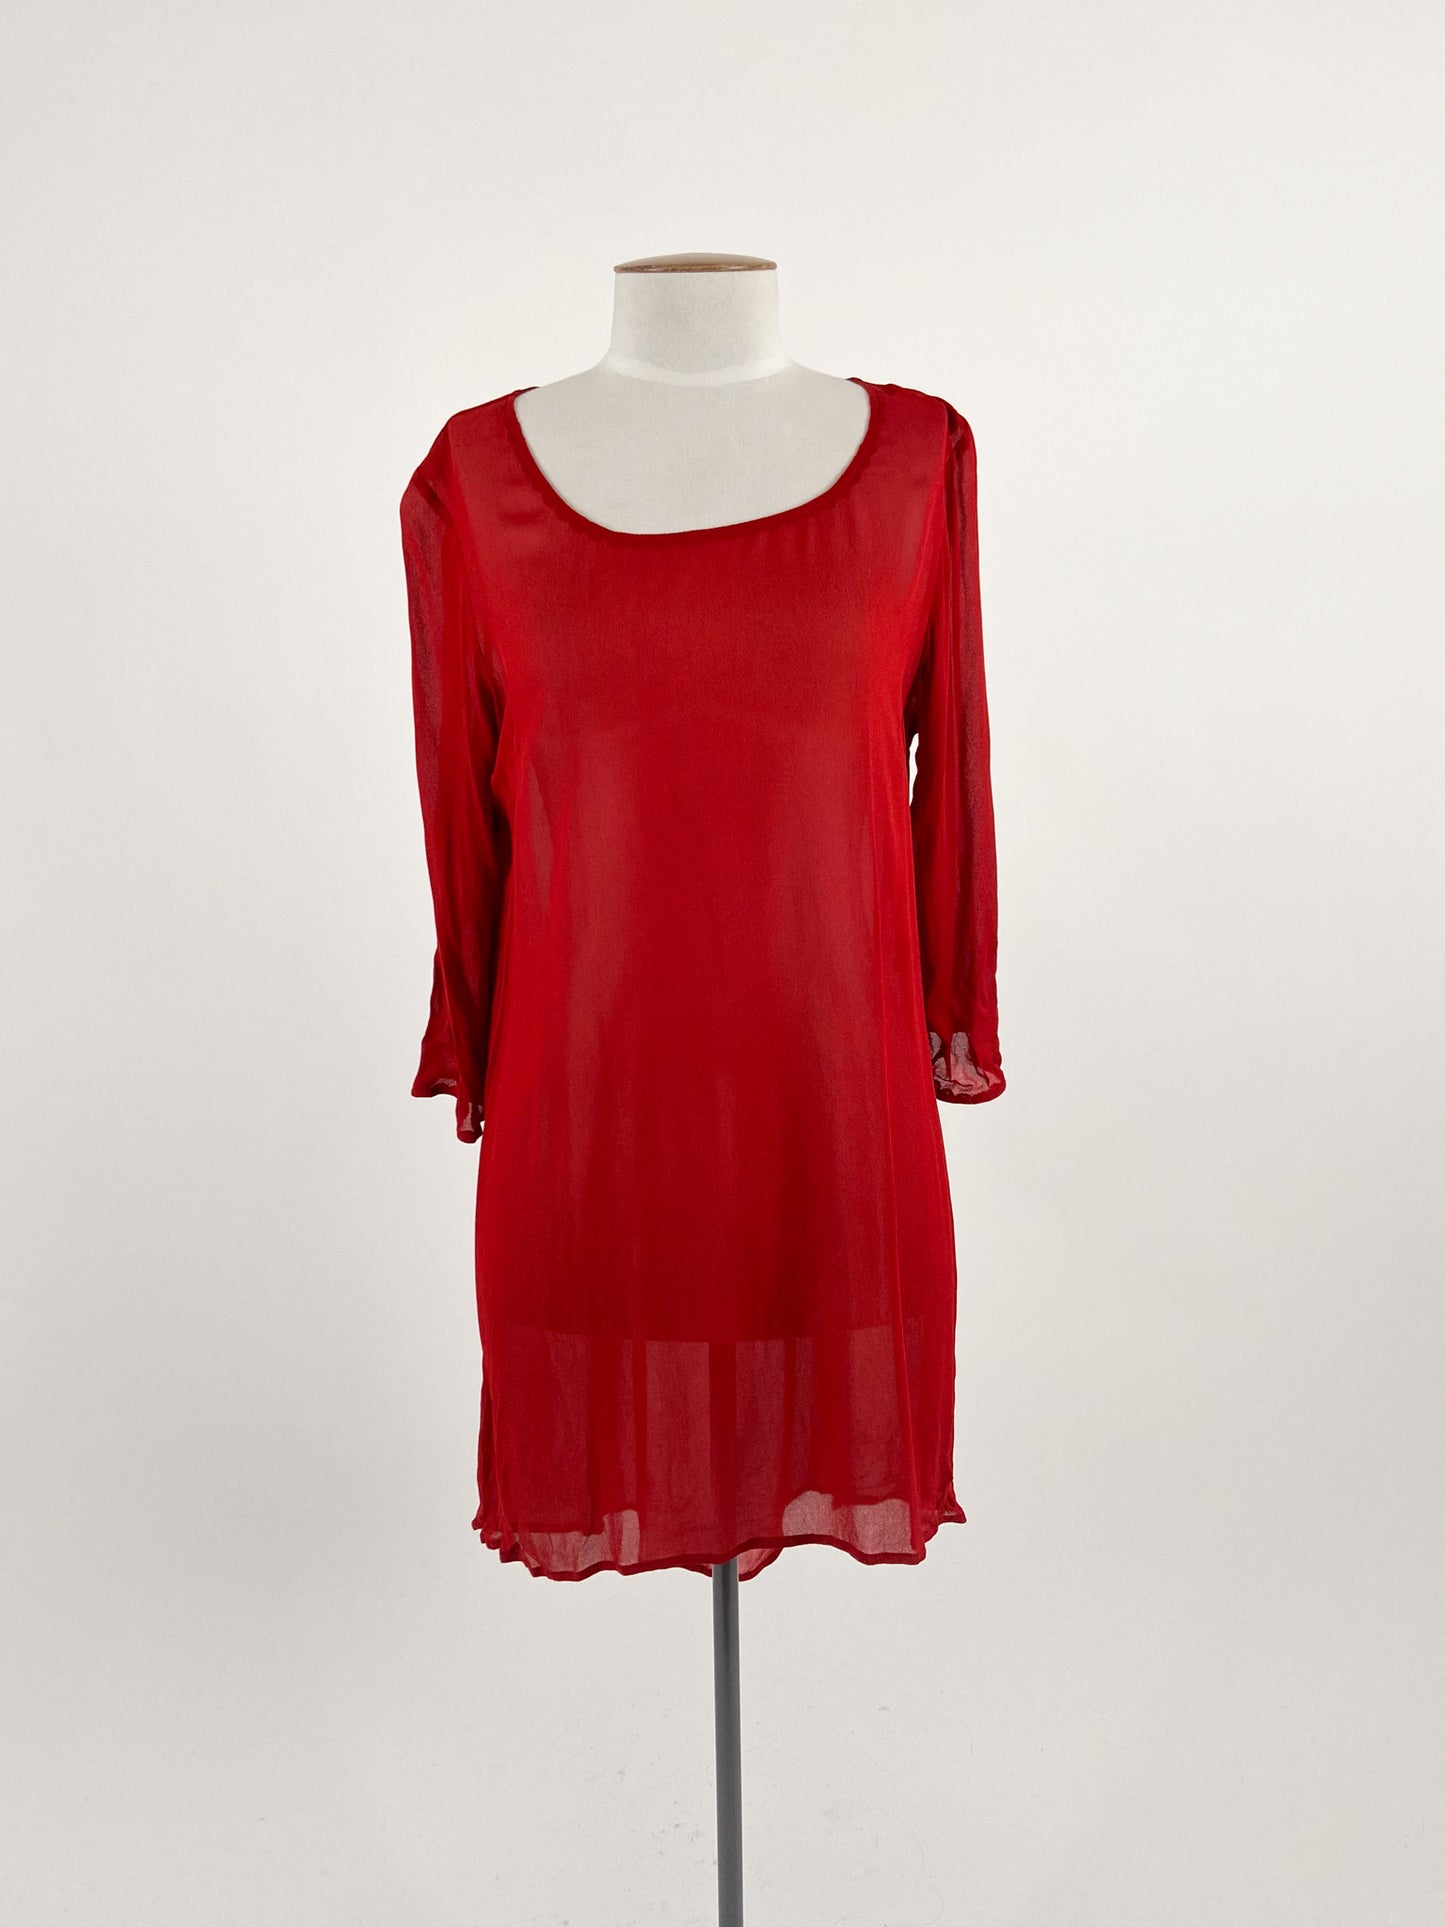 Annah Stretton | Red Casual Dress | Size S